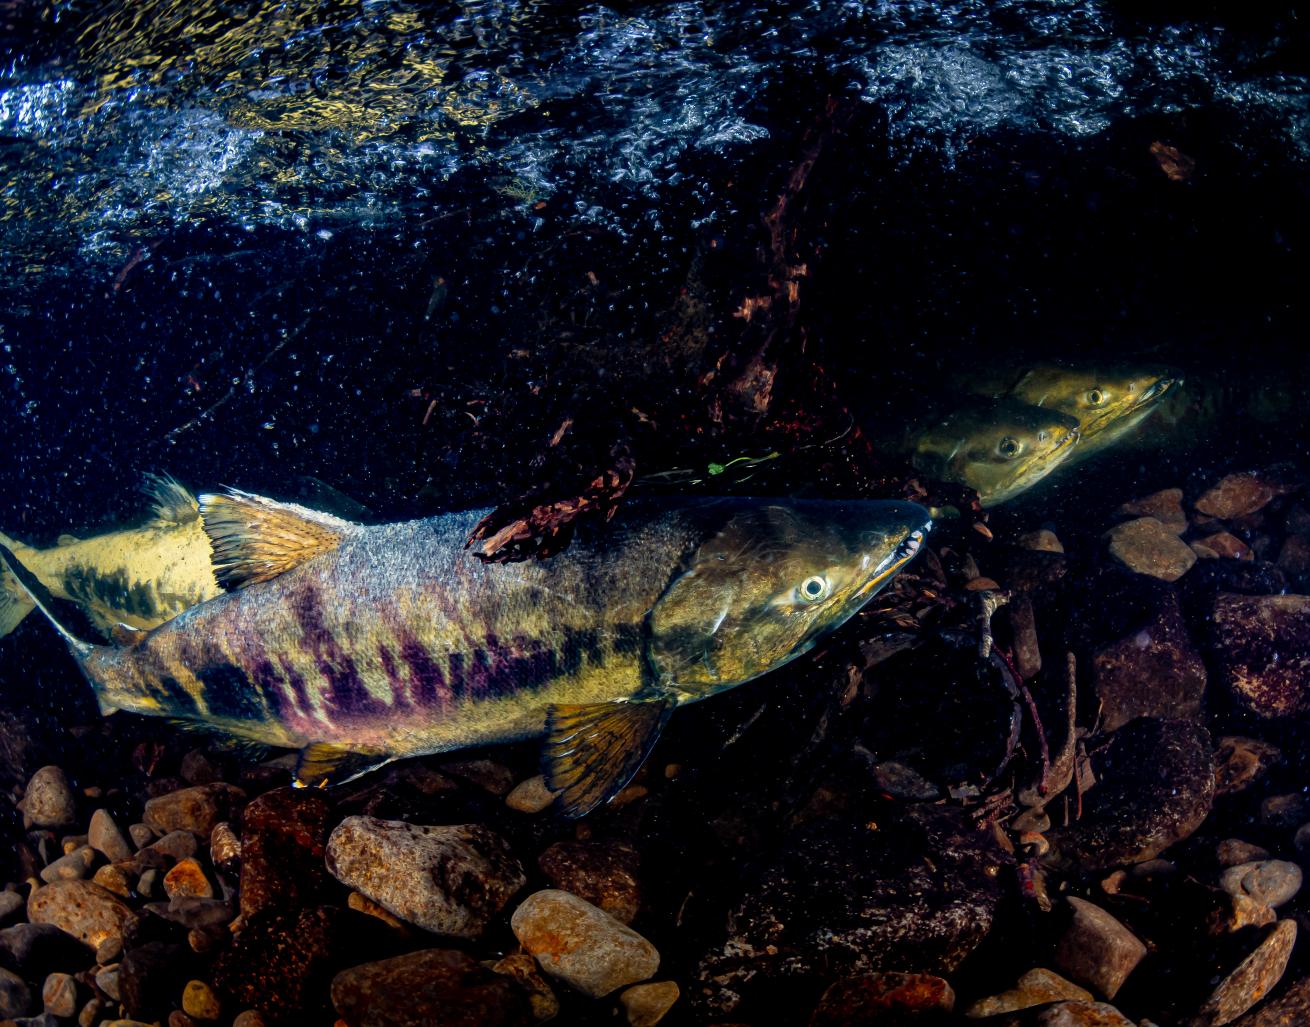 Chum salmon are popular in freshwater photography.